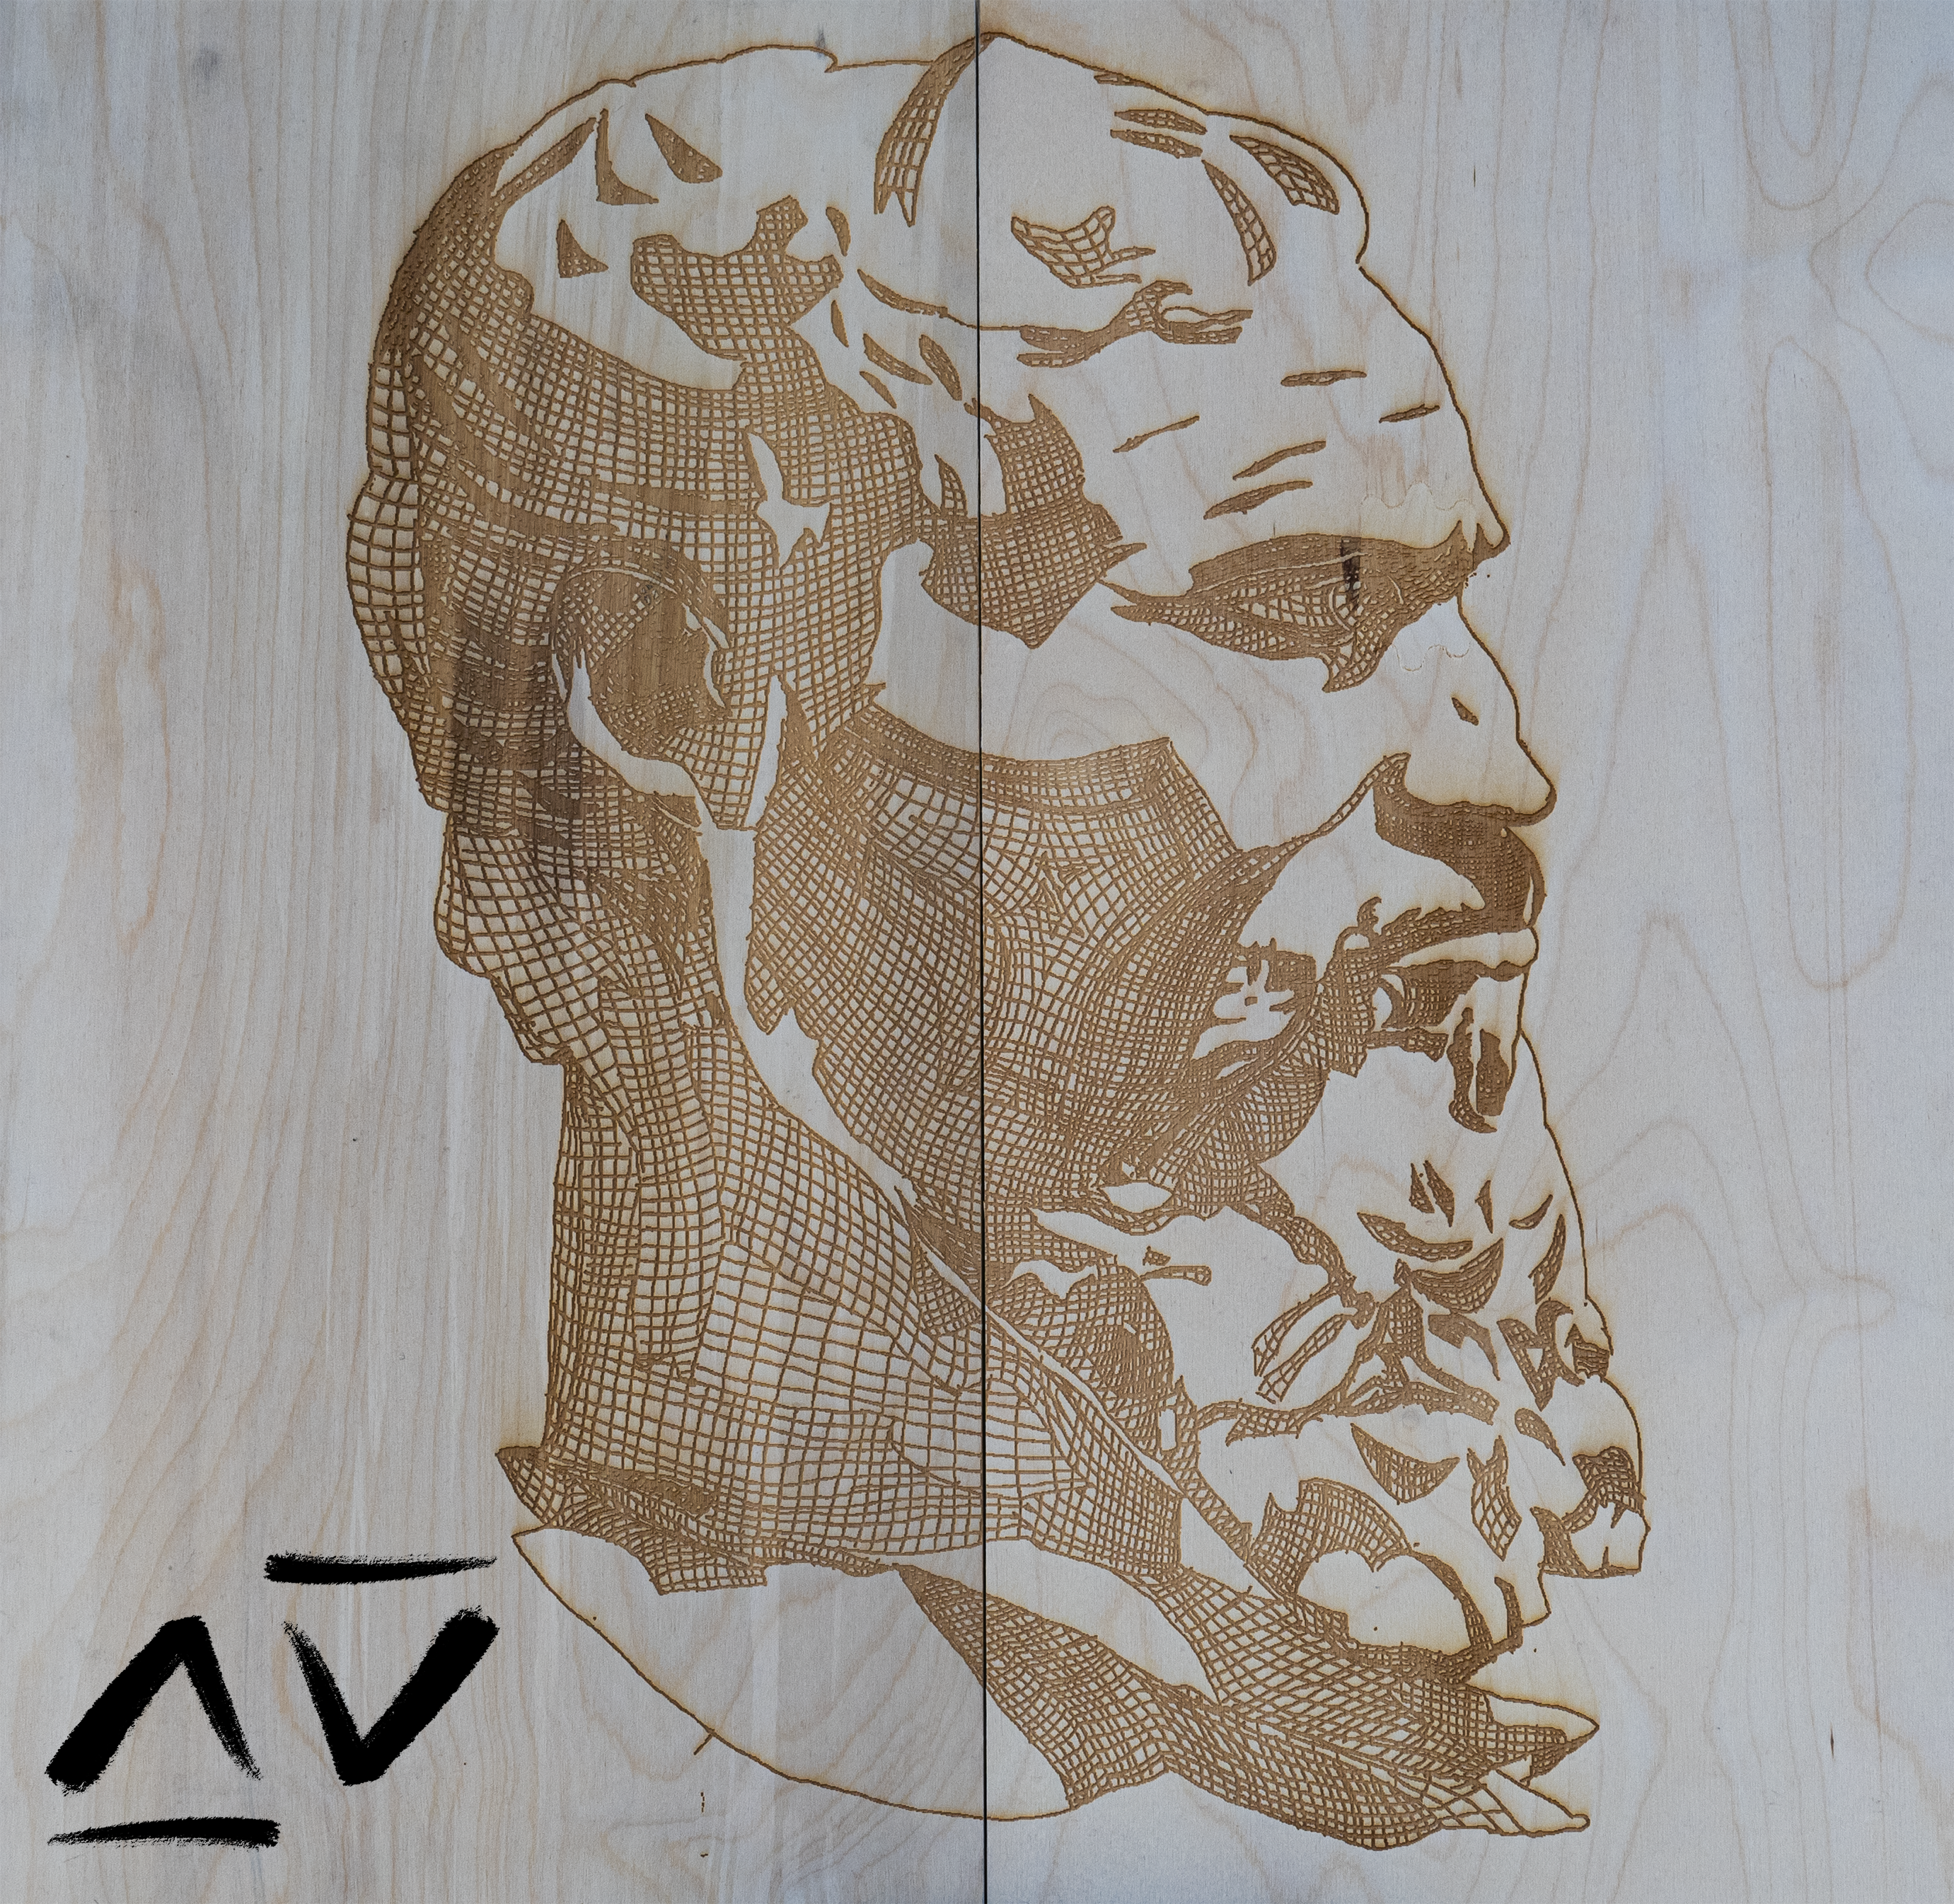 The laser cut into plywood of the Michelangelo Net drawing.